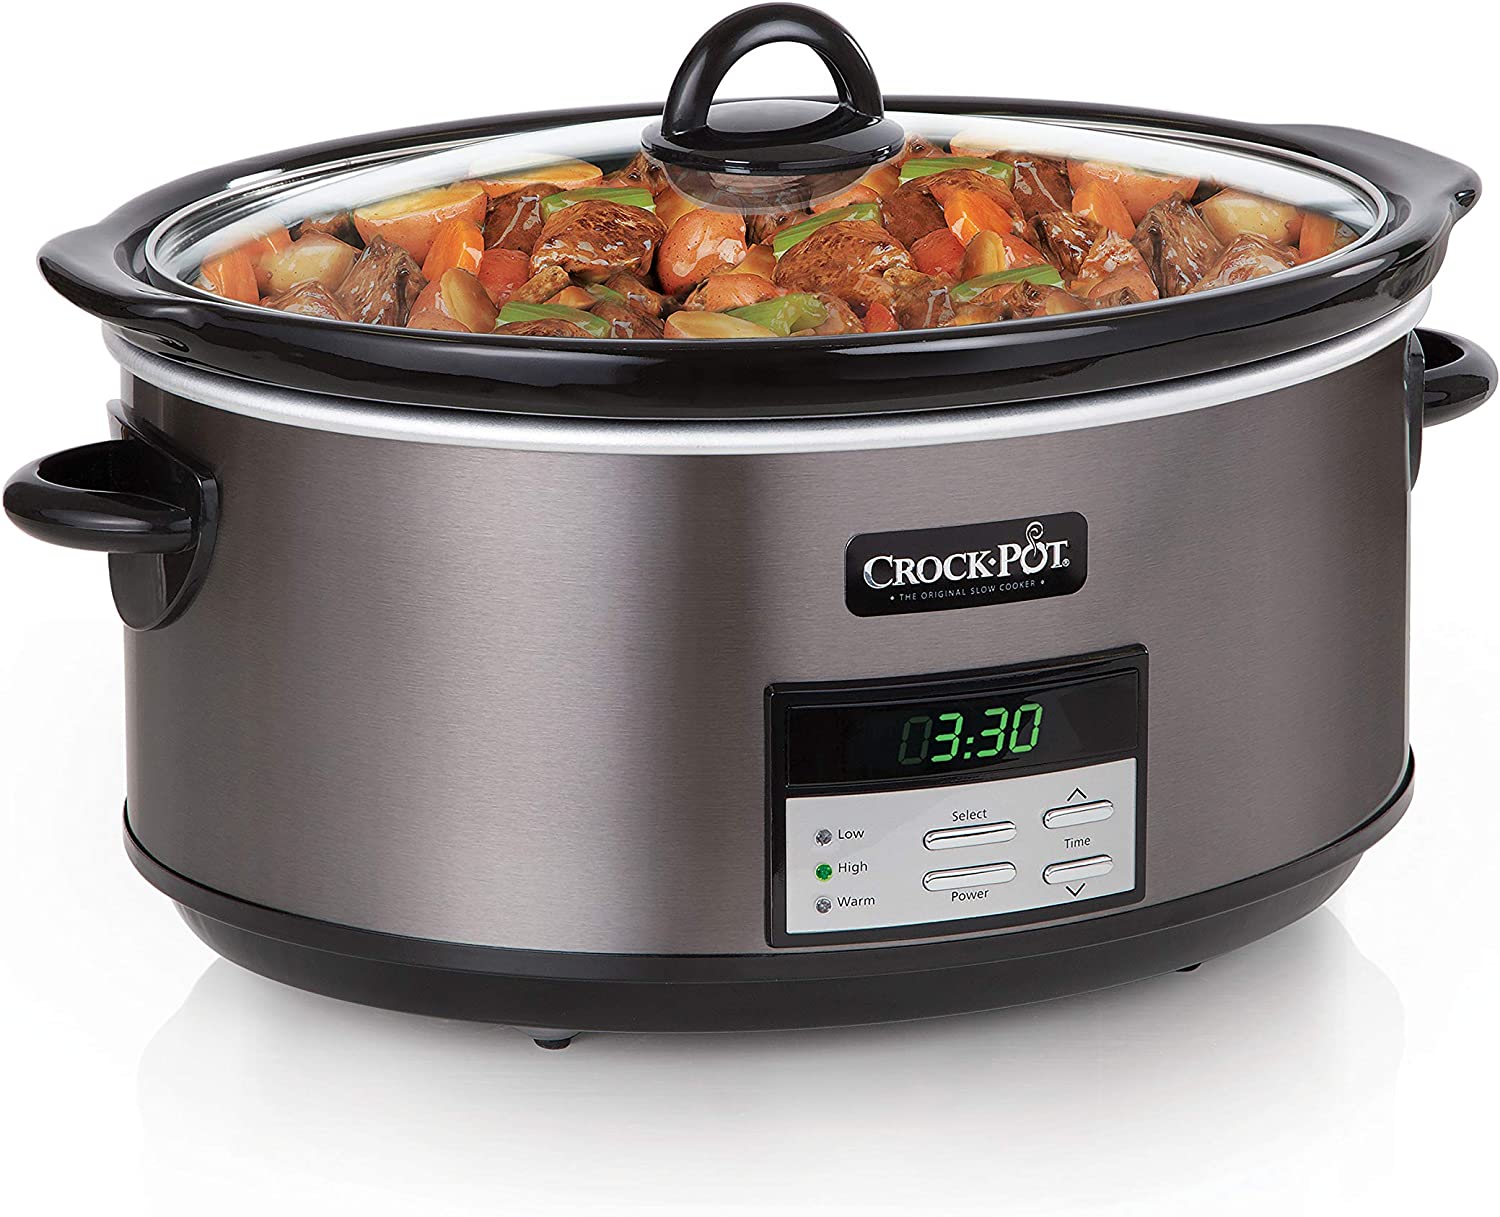 Black and Decker 7 qt. Silver Stoneware Slow Cooker - Total Qty: 1